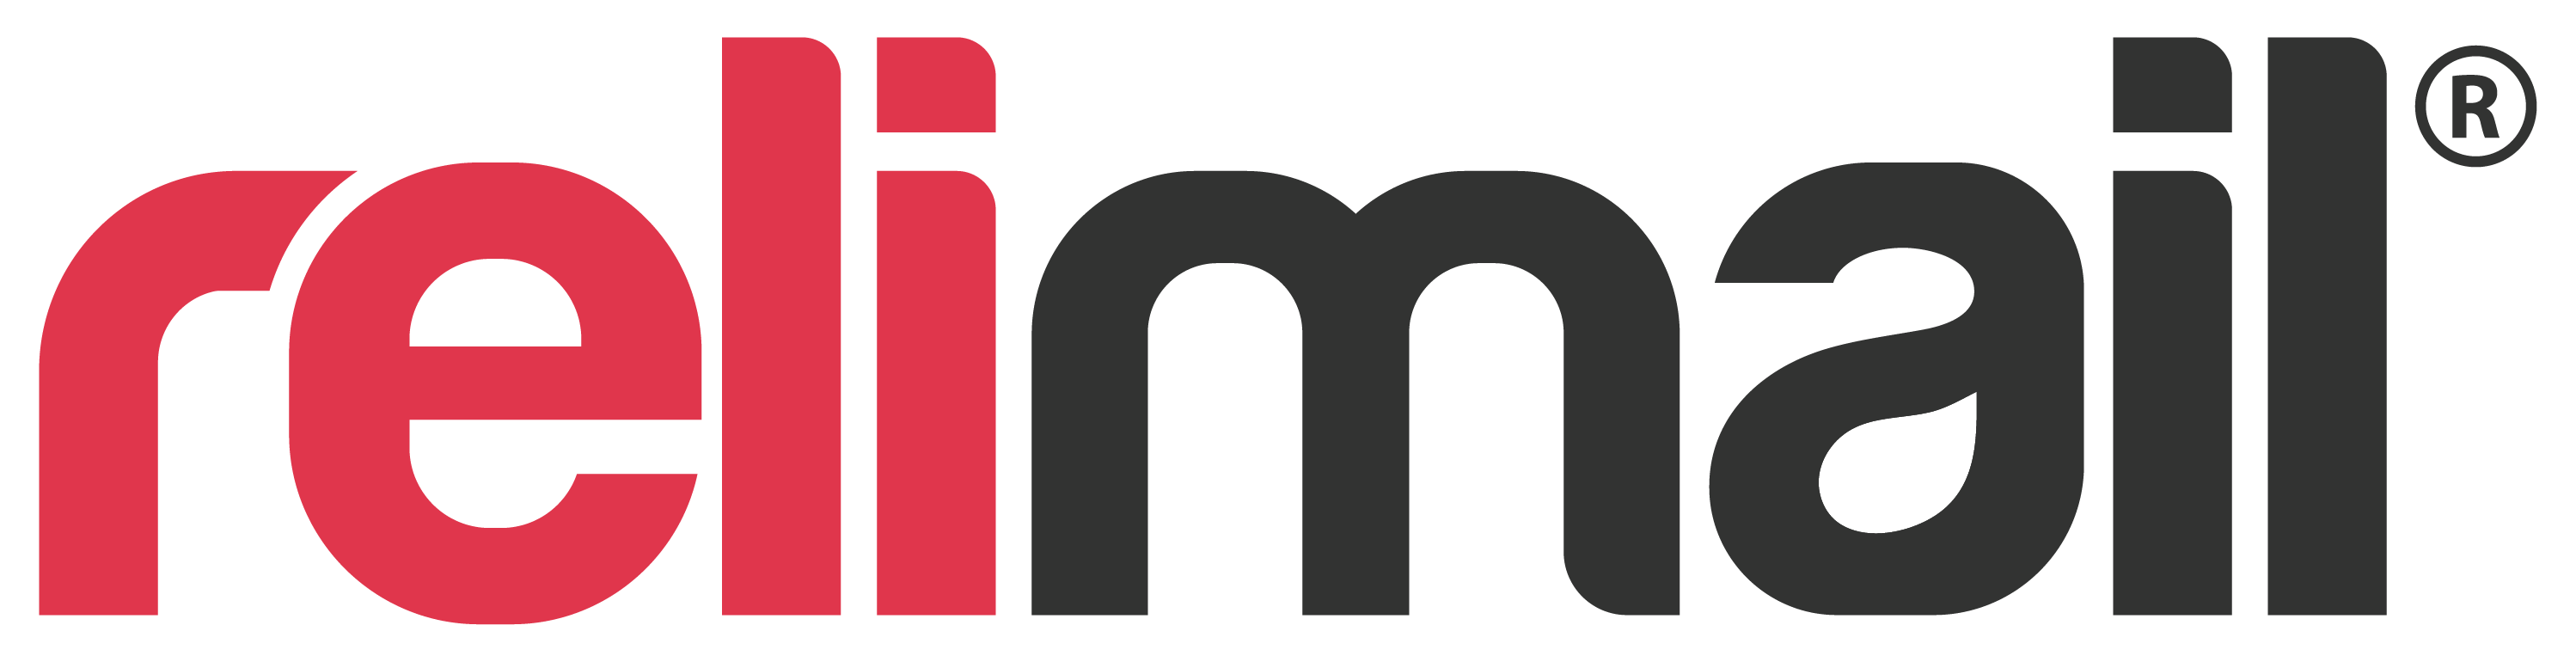 relimail logo